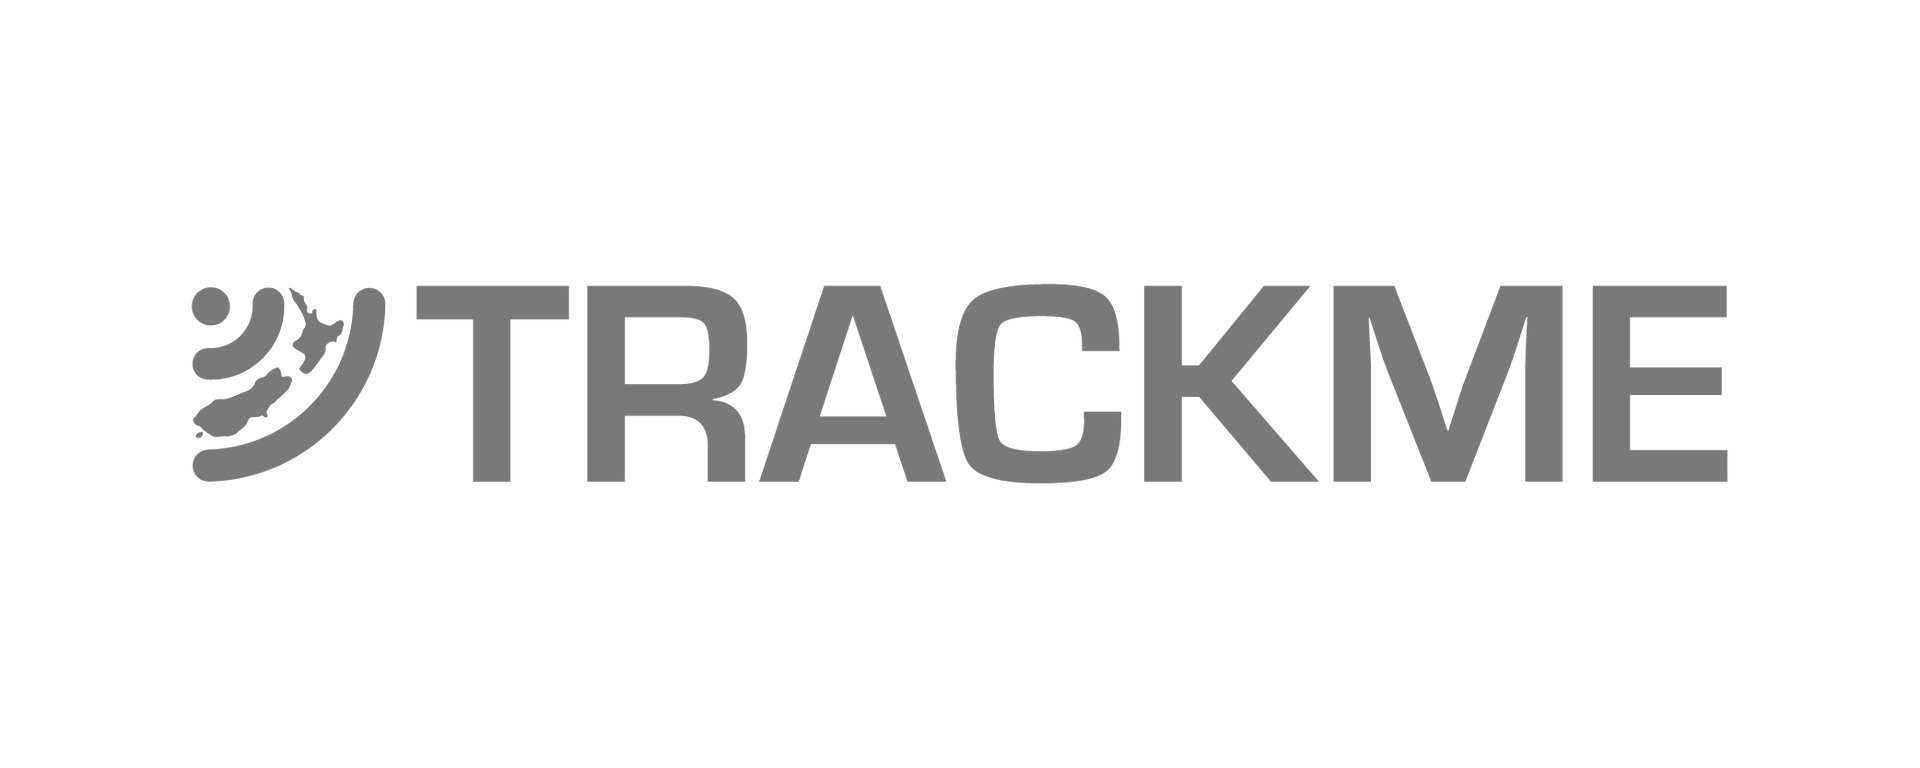 a black and white logo for trackme on a white background